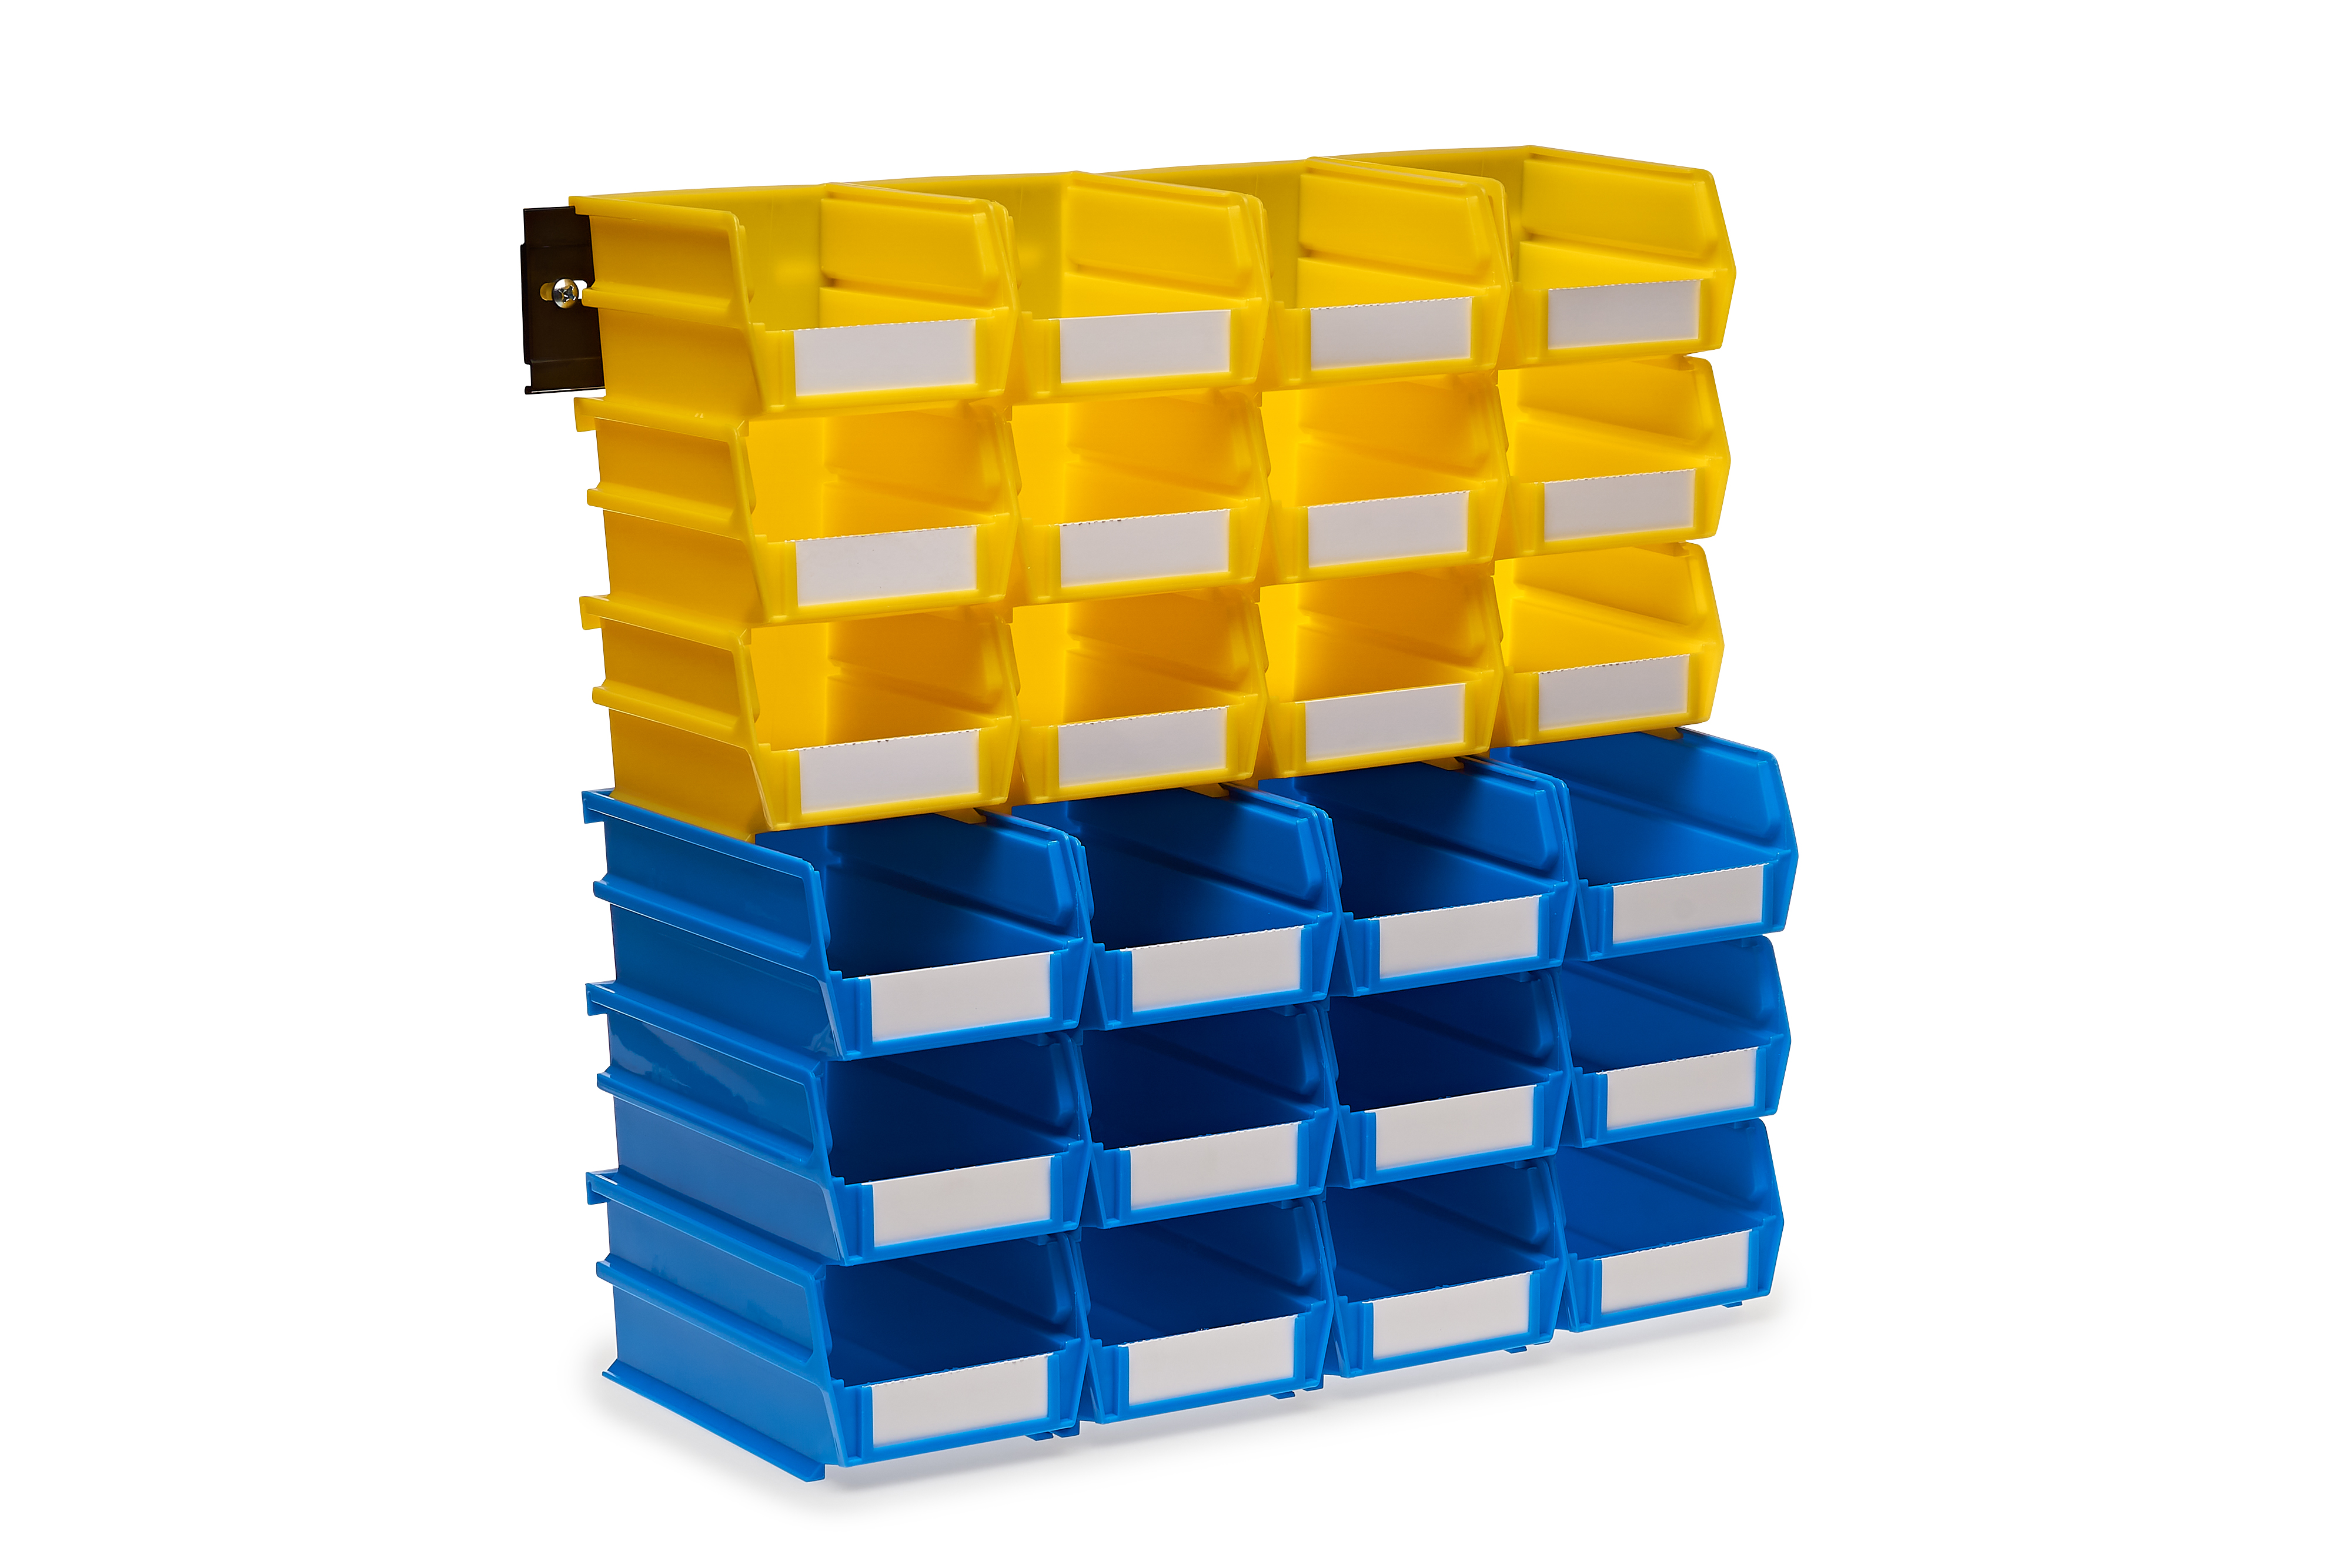 Triton Products® LocBin 26-Piece Wall Storage Unit with (12) 5-3/8"L x 4-1/8"W x 3"H YEL Bins & (12) 7-3/8"L x 4-1/8"W x 3"H Blue Bins, 24ct, Wall Mount Rails 8-3/4"L with Hardware, 2pk - image 1 of 7